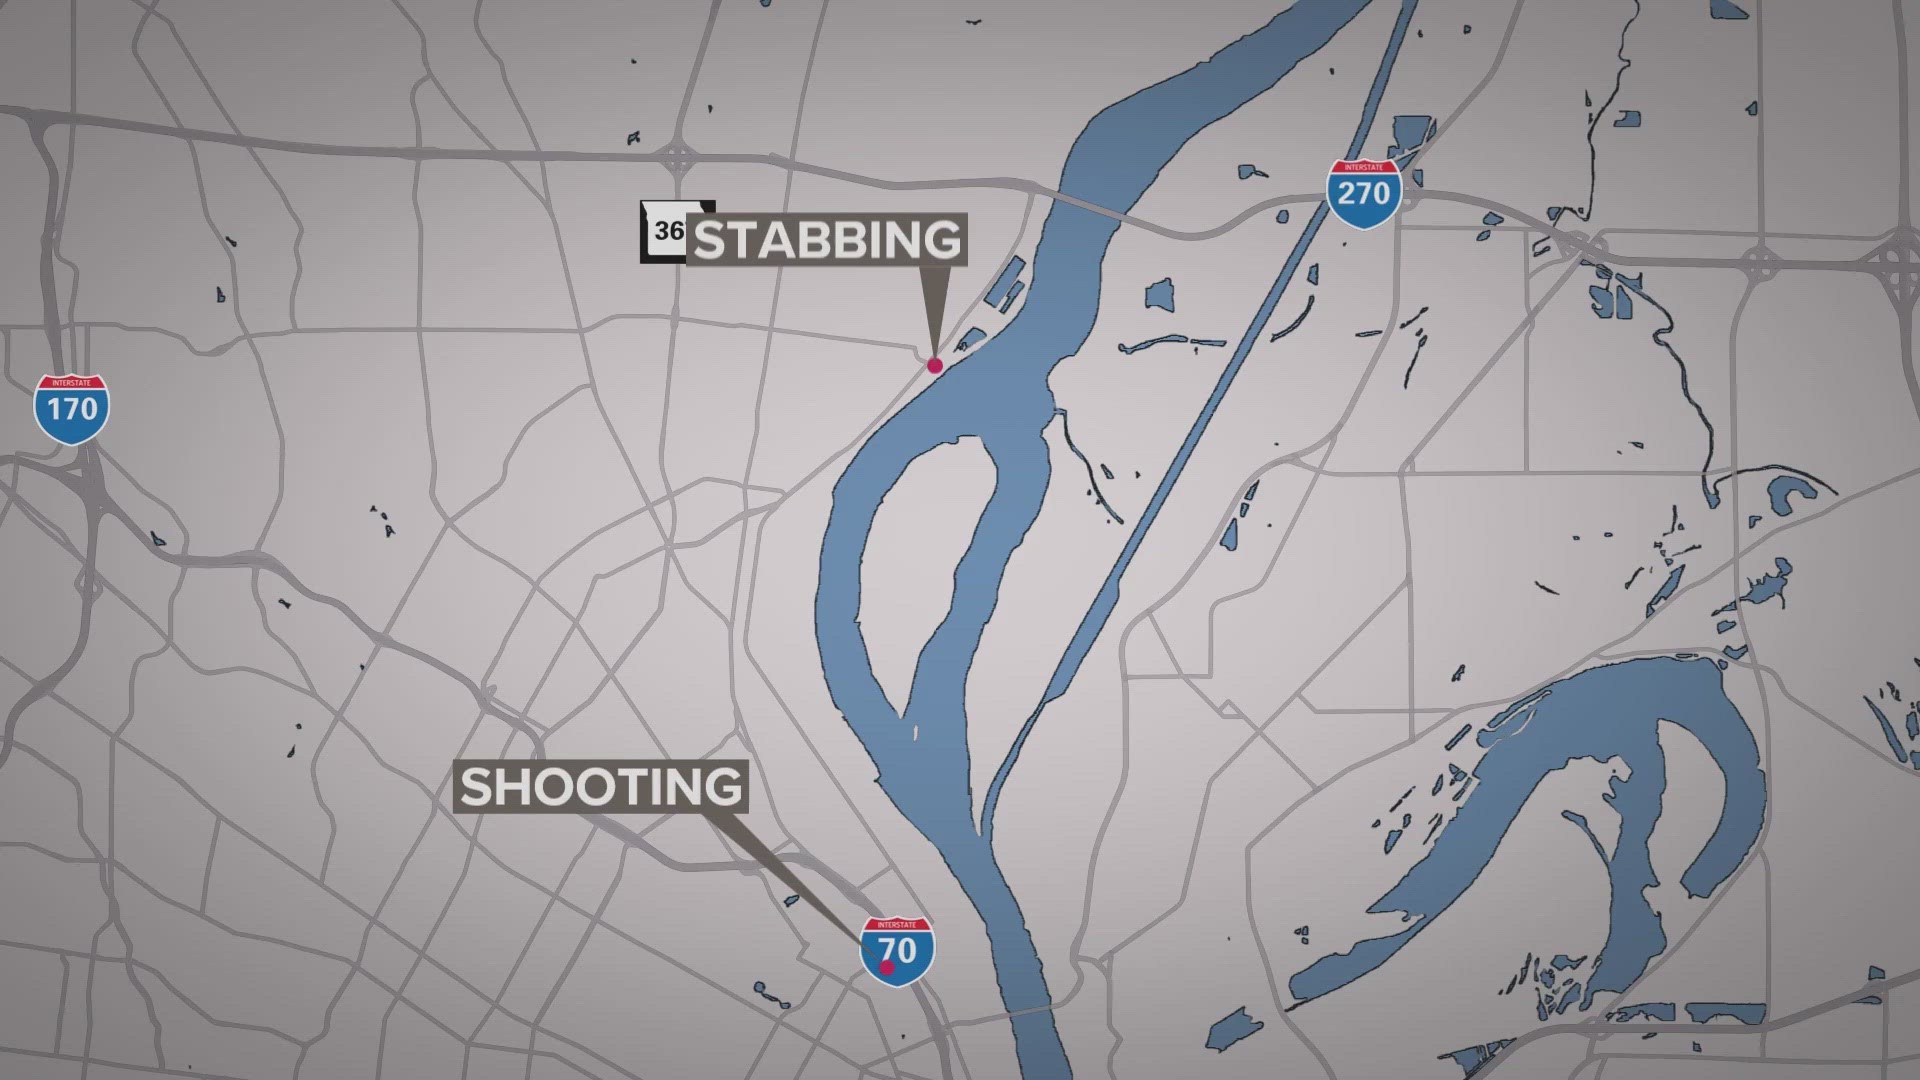 One person was stabbed and another was shot to death early Sunday morning in north St. Louis. Police are investigating the separate incidents.